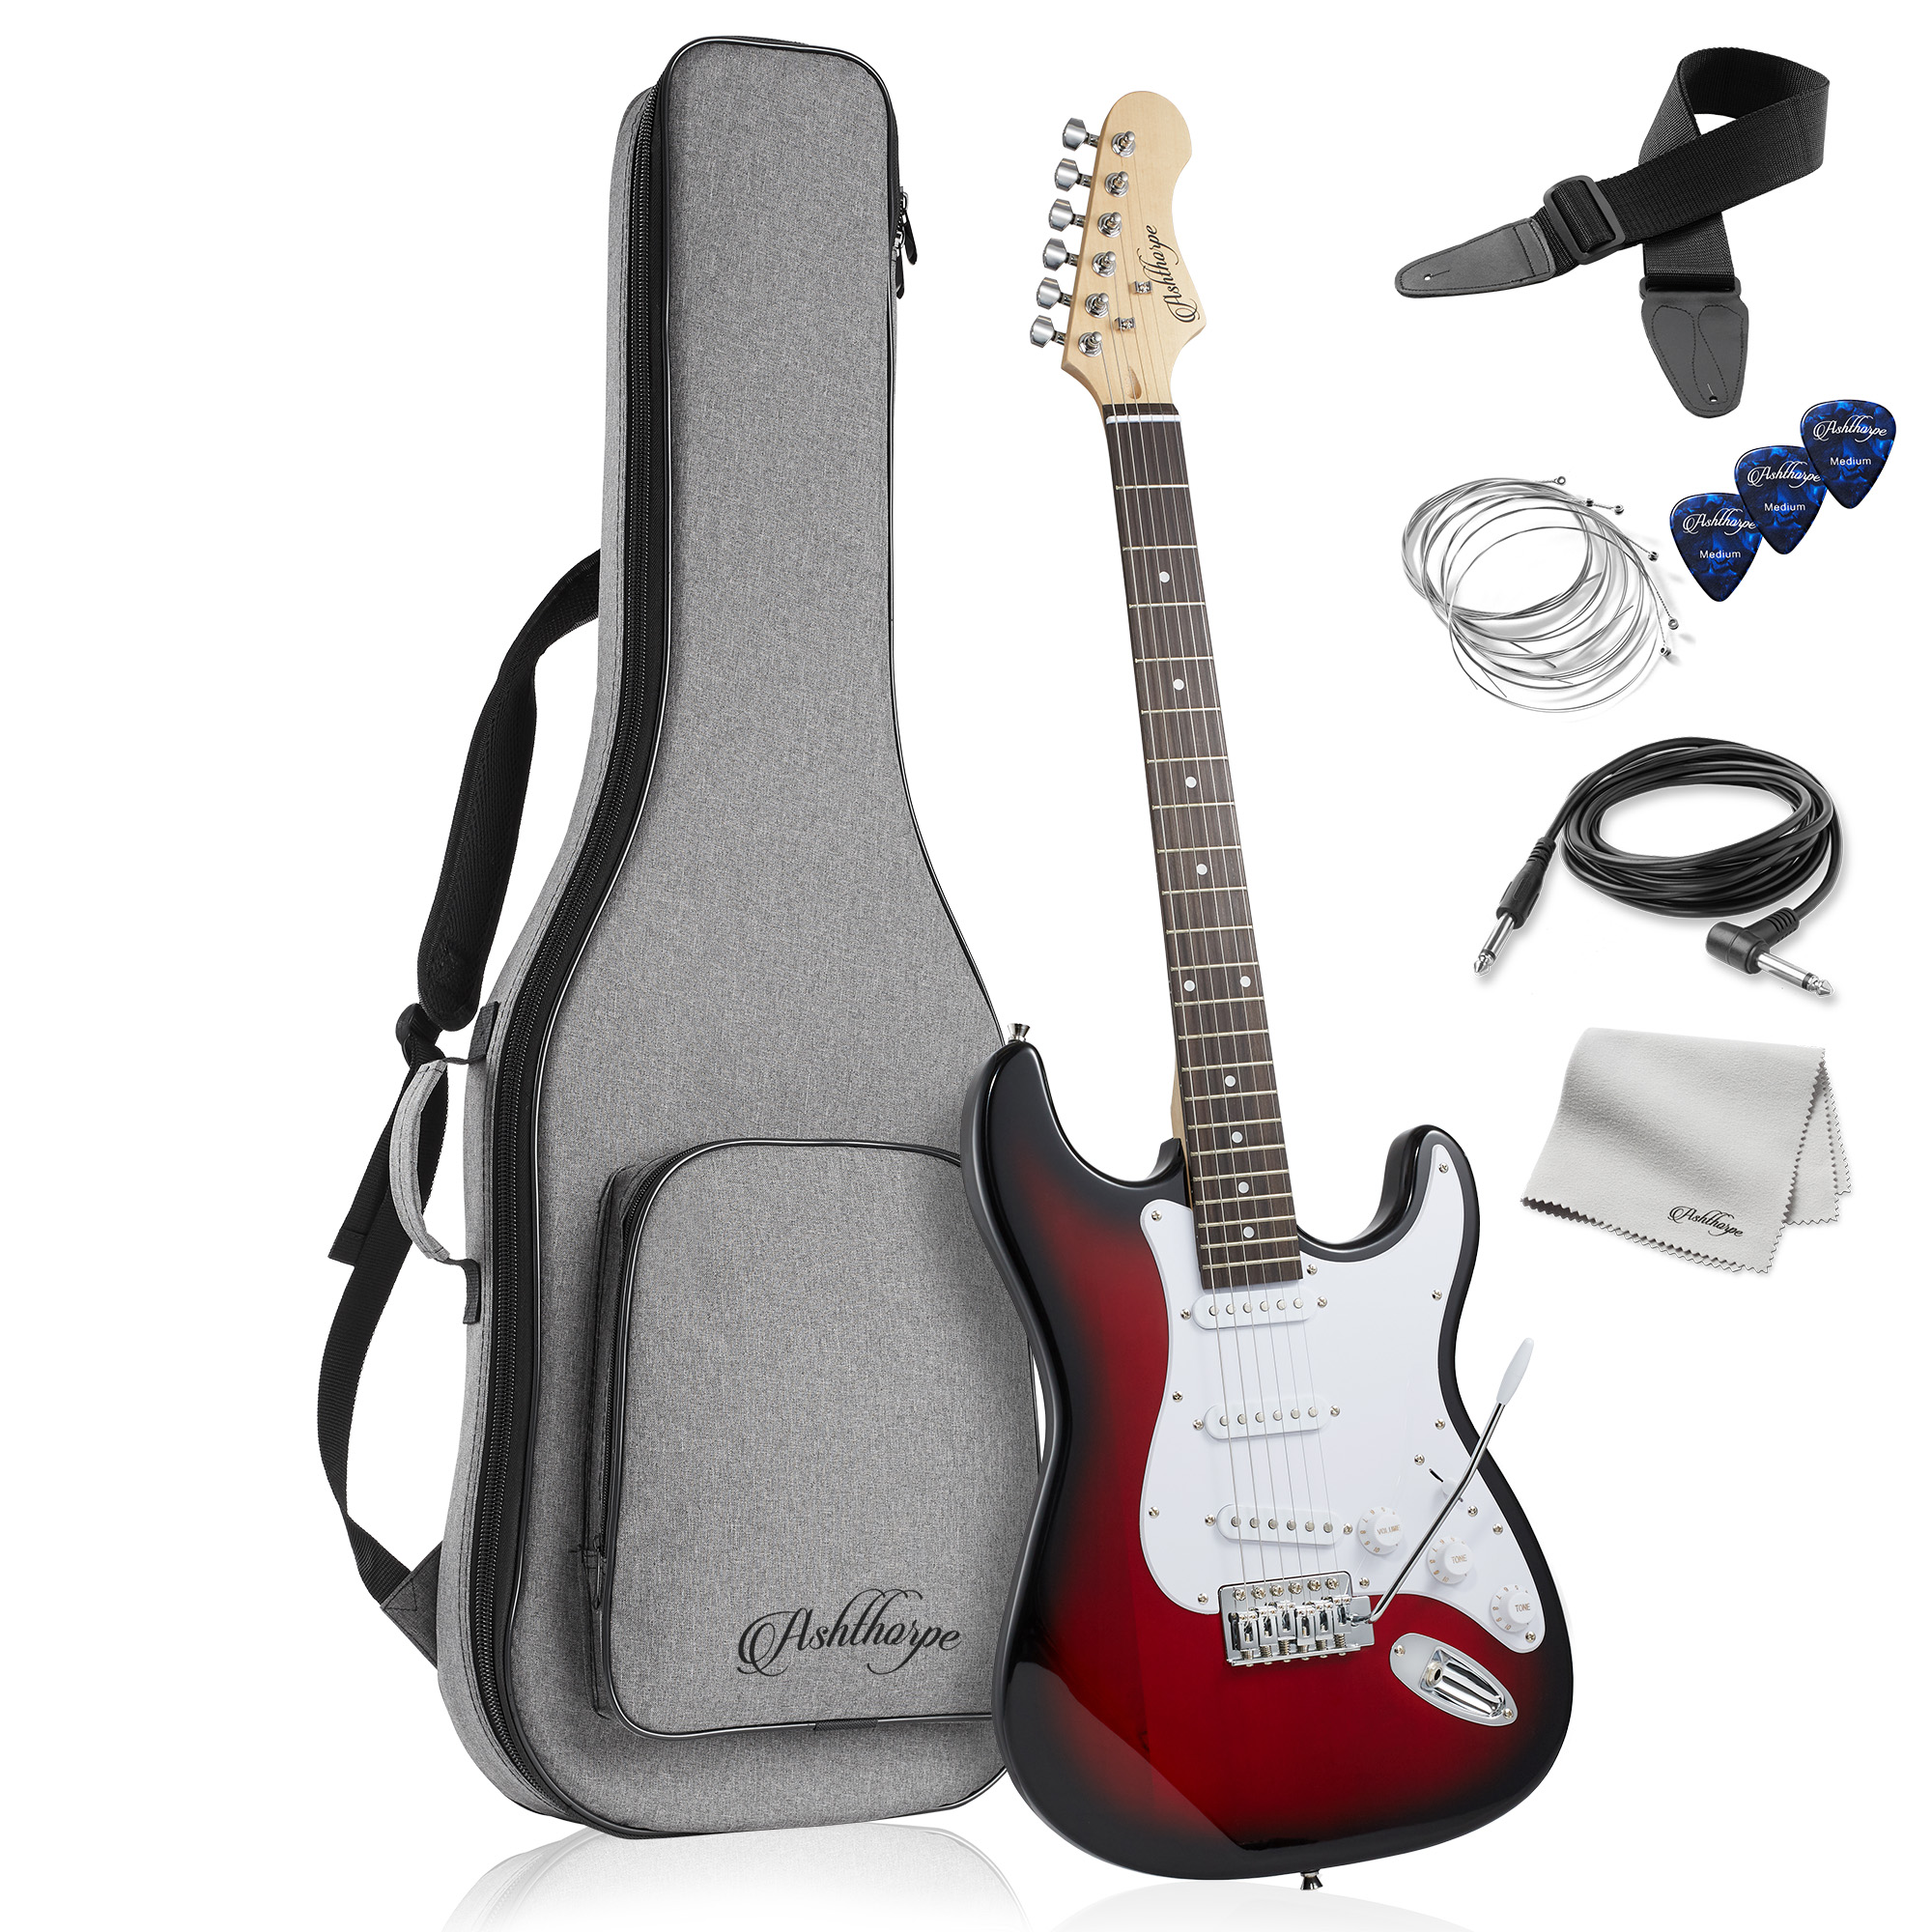 Ashthorpe 39-Inch Electric Guitar with S-S-S Pickups and Tremolo Bar - Red/White - image 1 of 7